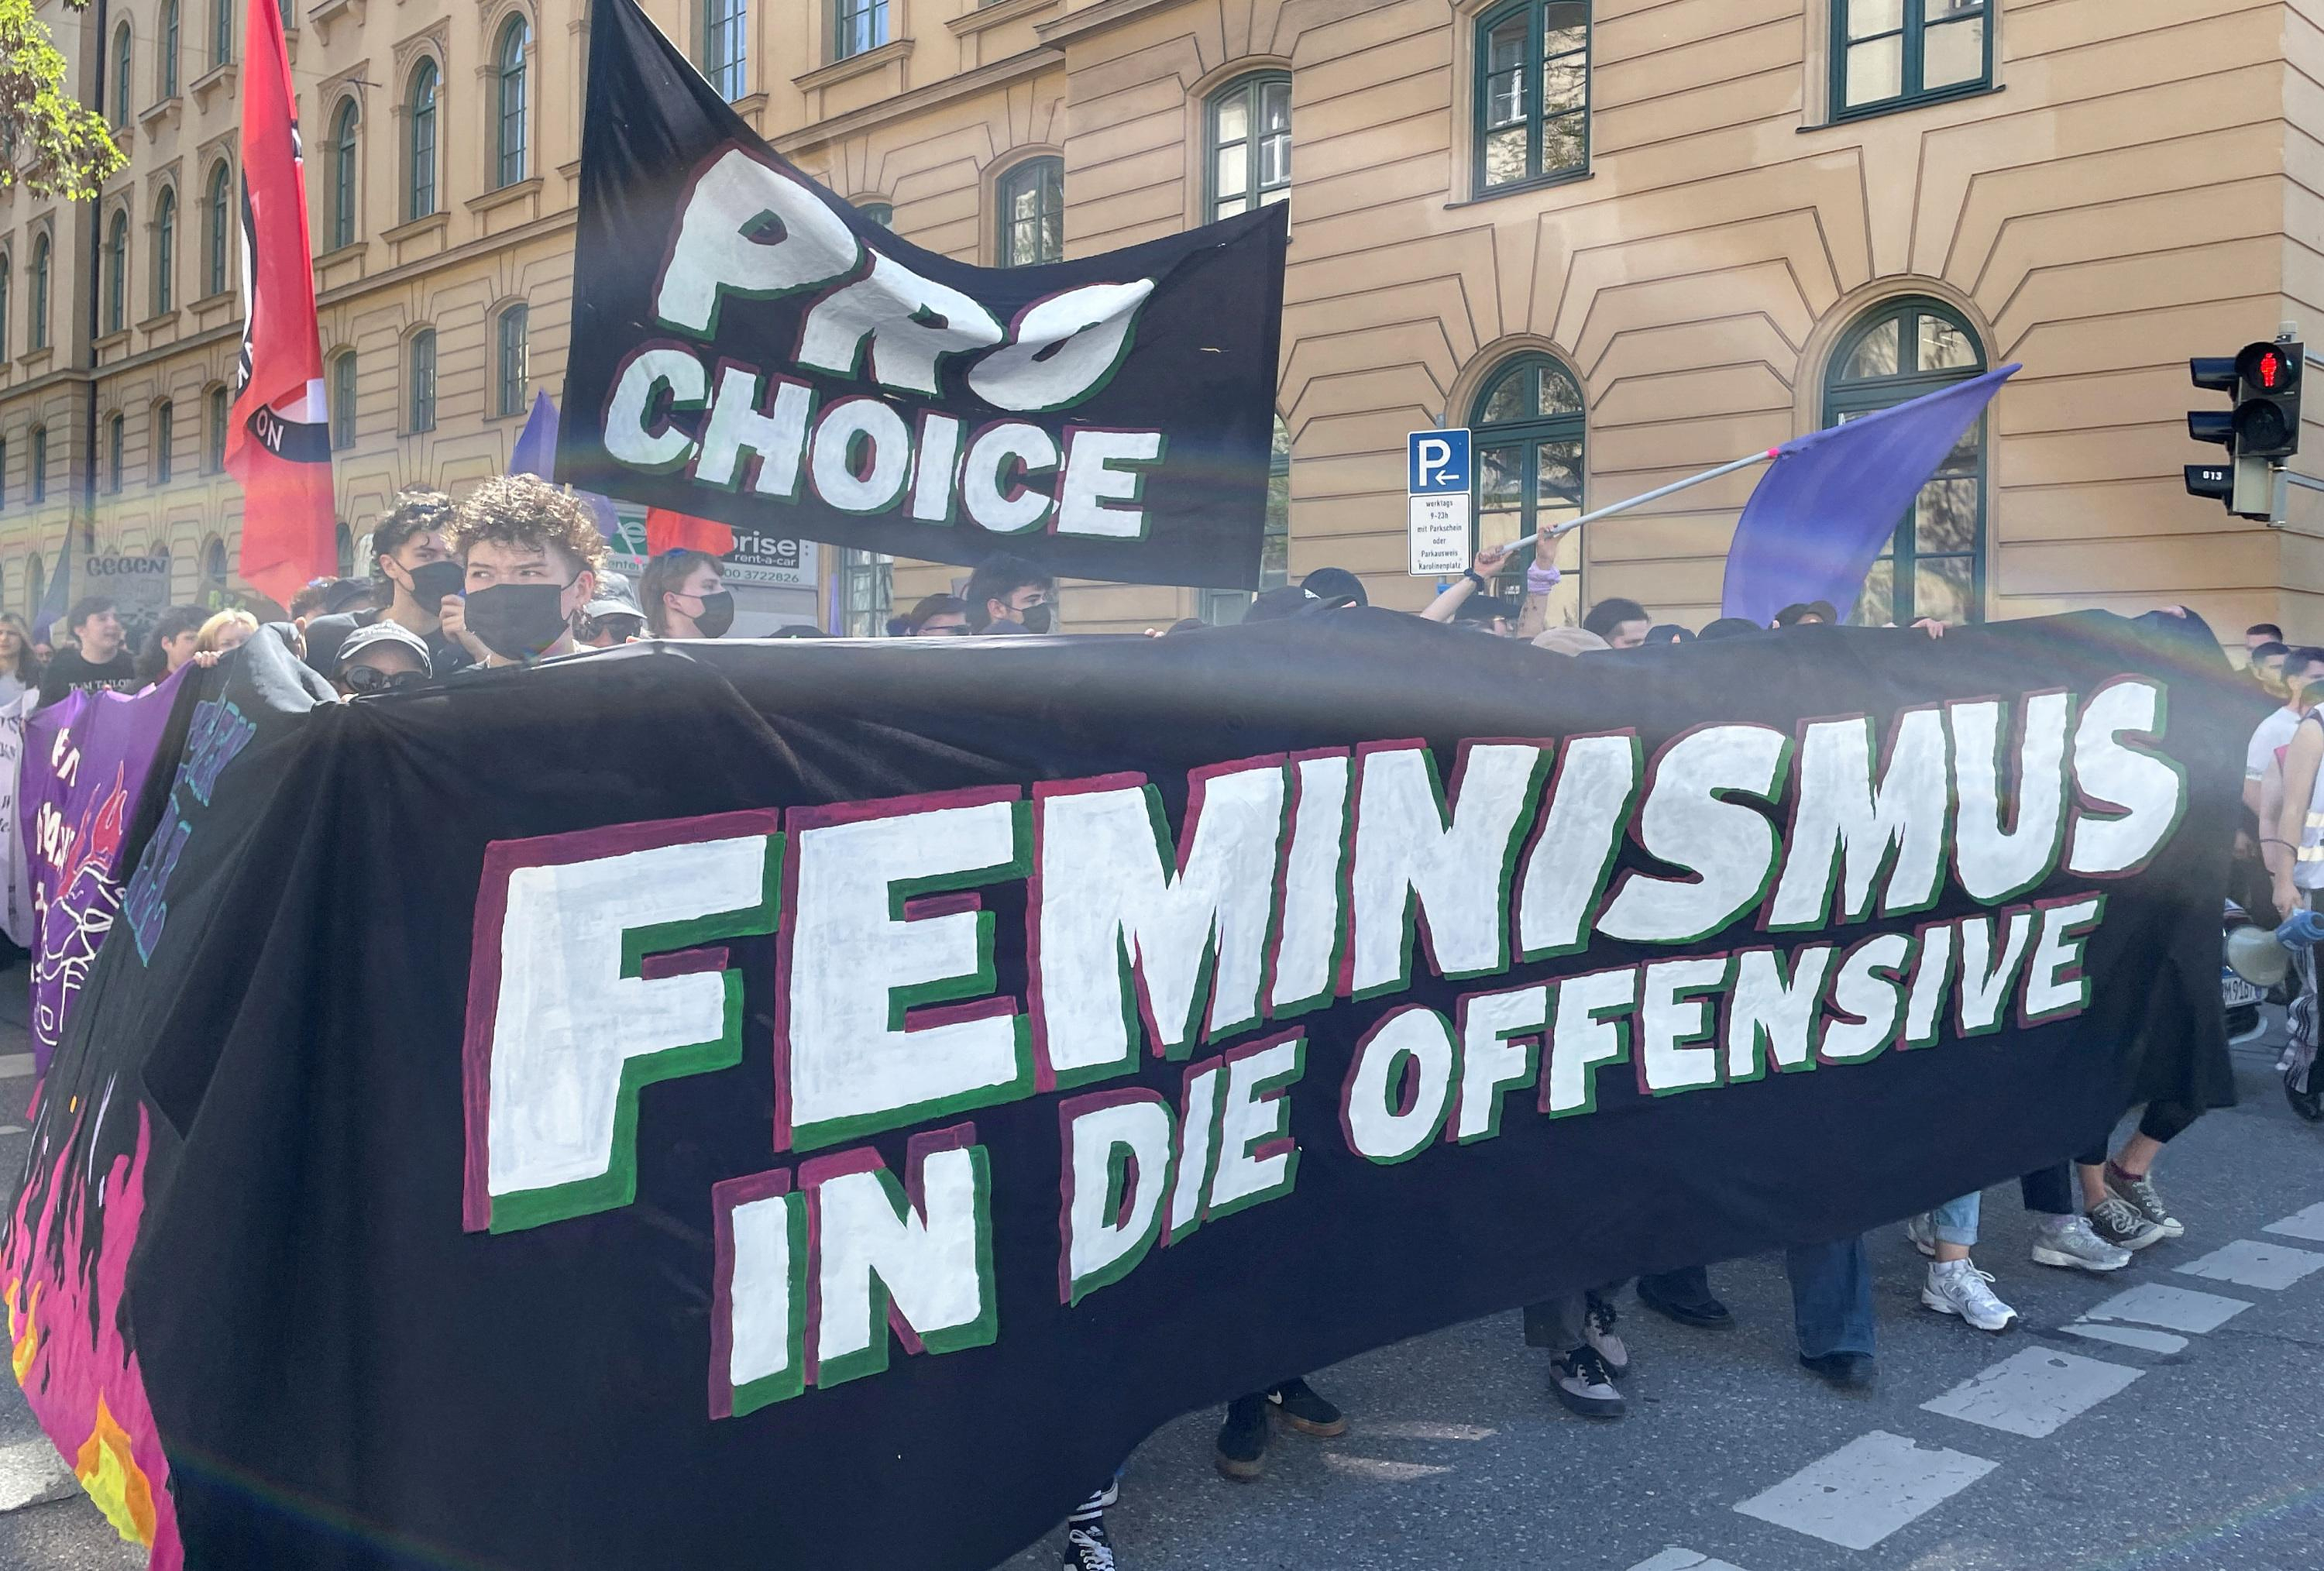 Germany: abortions should be authorized up to 12 weeks, concludes a commission launched by Olaf Scholz